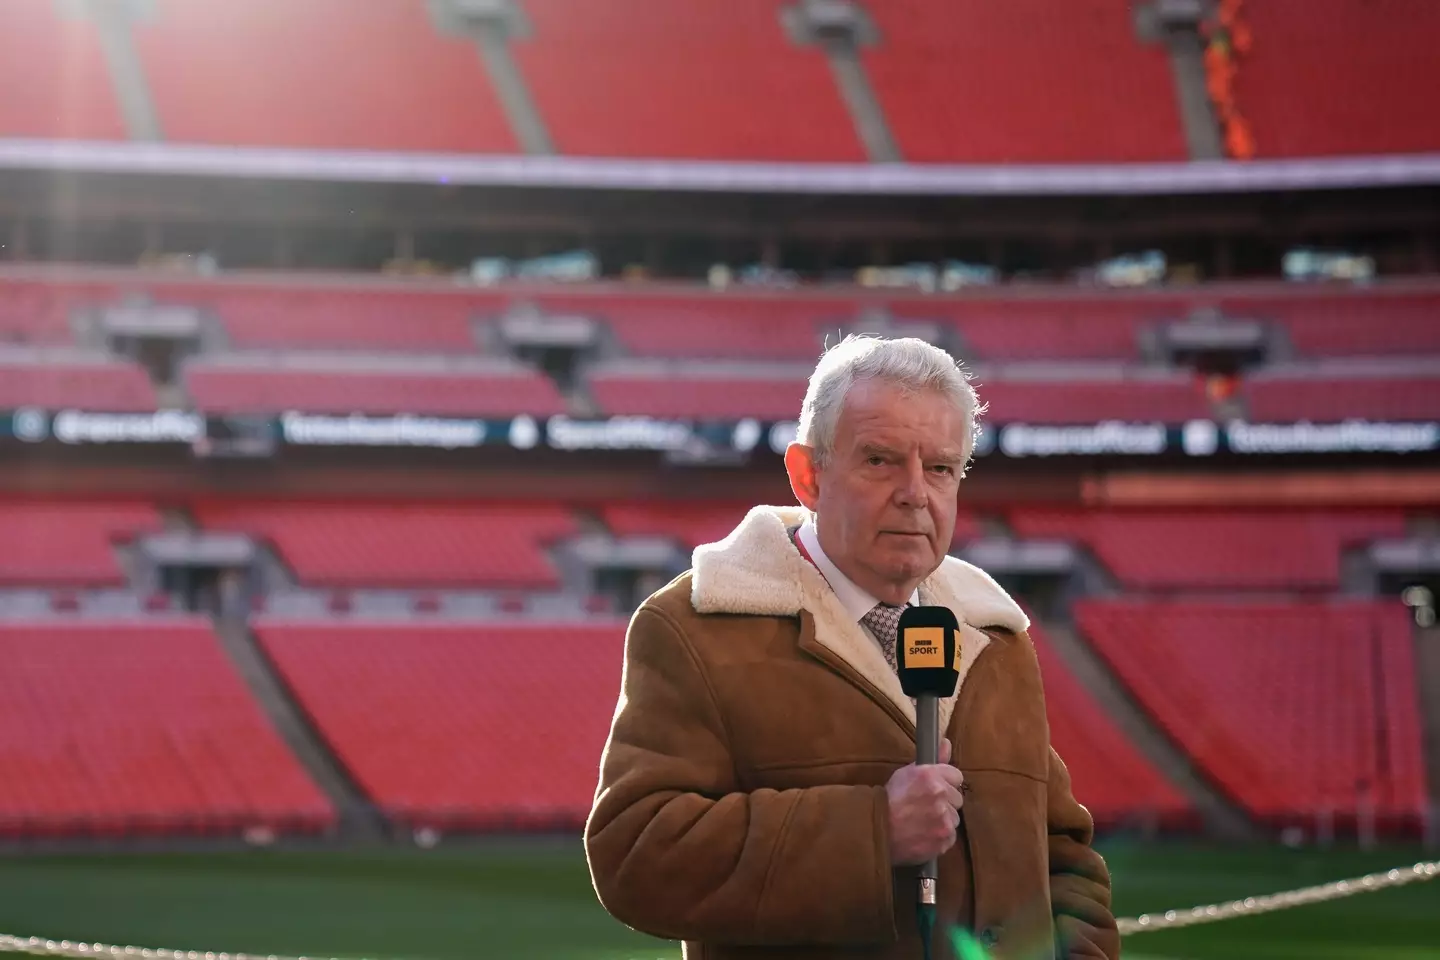 For many John Motson was the voice of football for decades.